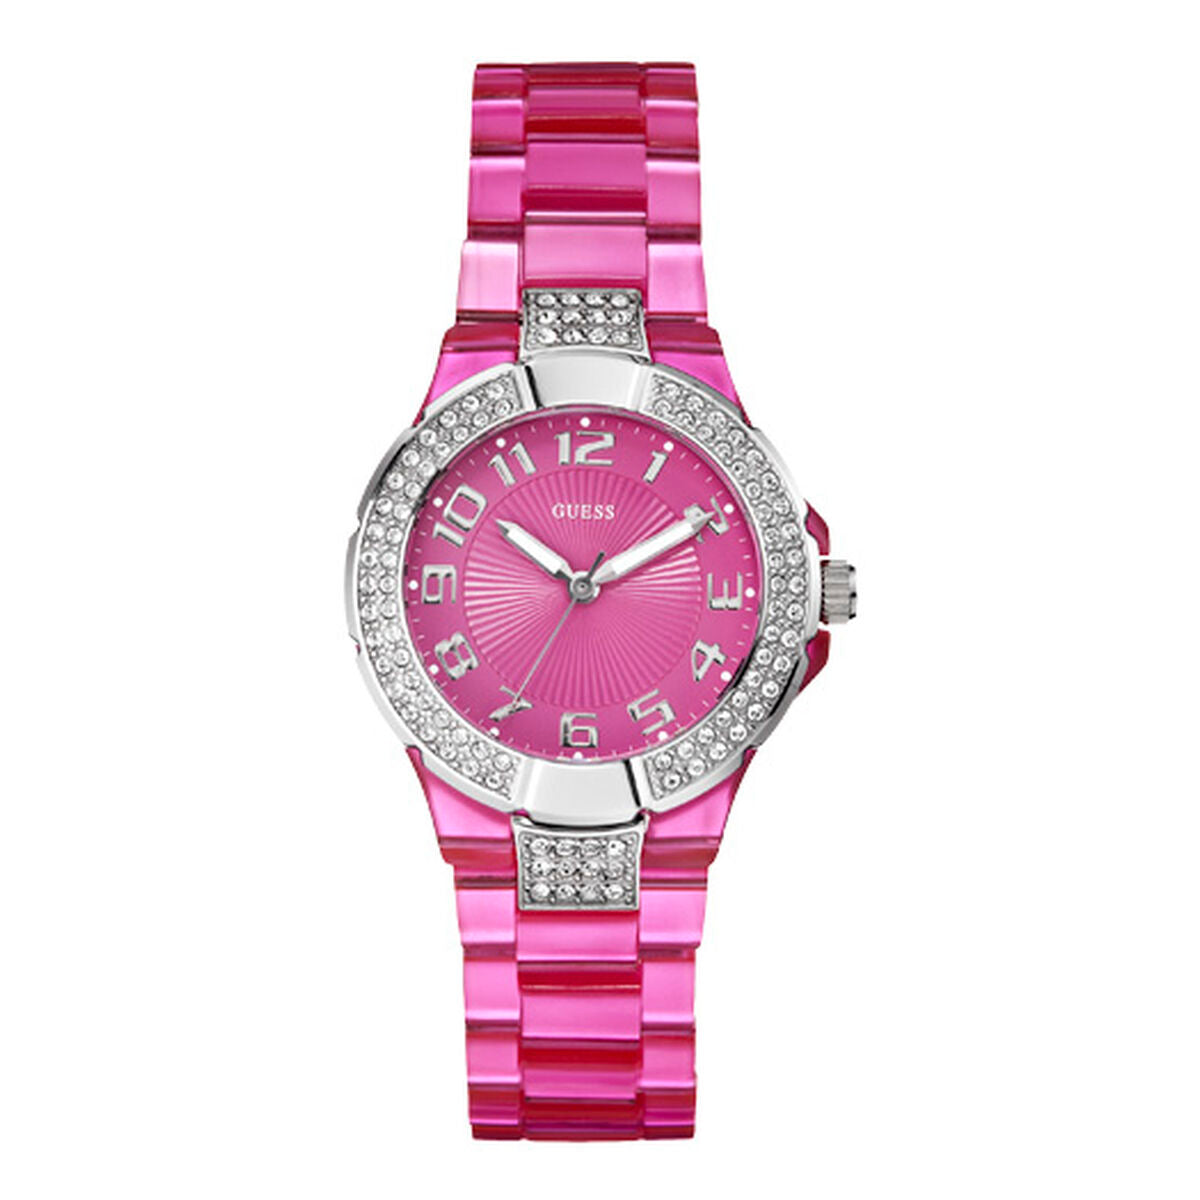 Ladies' Watch Guess W11611L4 (Ø 28 mm), Guess, Watches, Women, ladies-watch-guess-w11611l4-o-28-mm, Brand_Guess, category-reference-2570, category-reference-2635, category-reference-2995, category-reference-t-19667, category-reference-t-19725, category-reference-t-20352, Condition_NEW, fashion, original gifts, Price_50 - 100, RiotNook